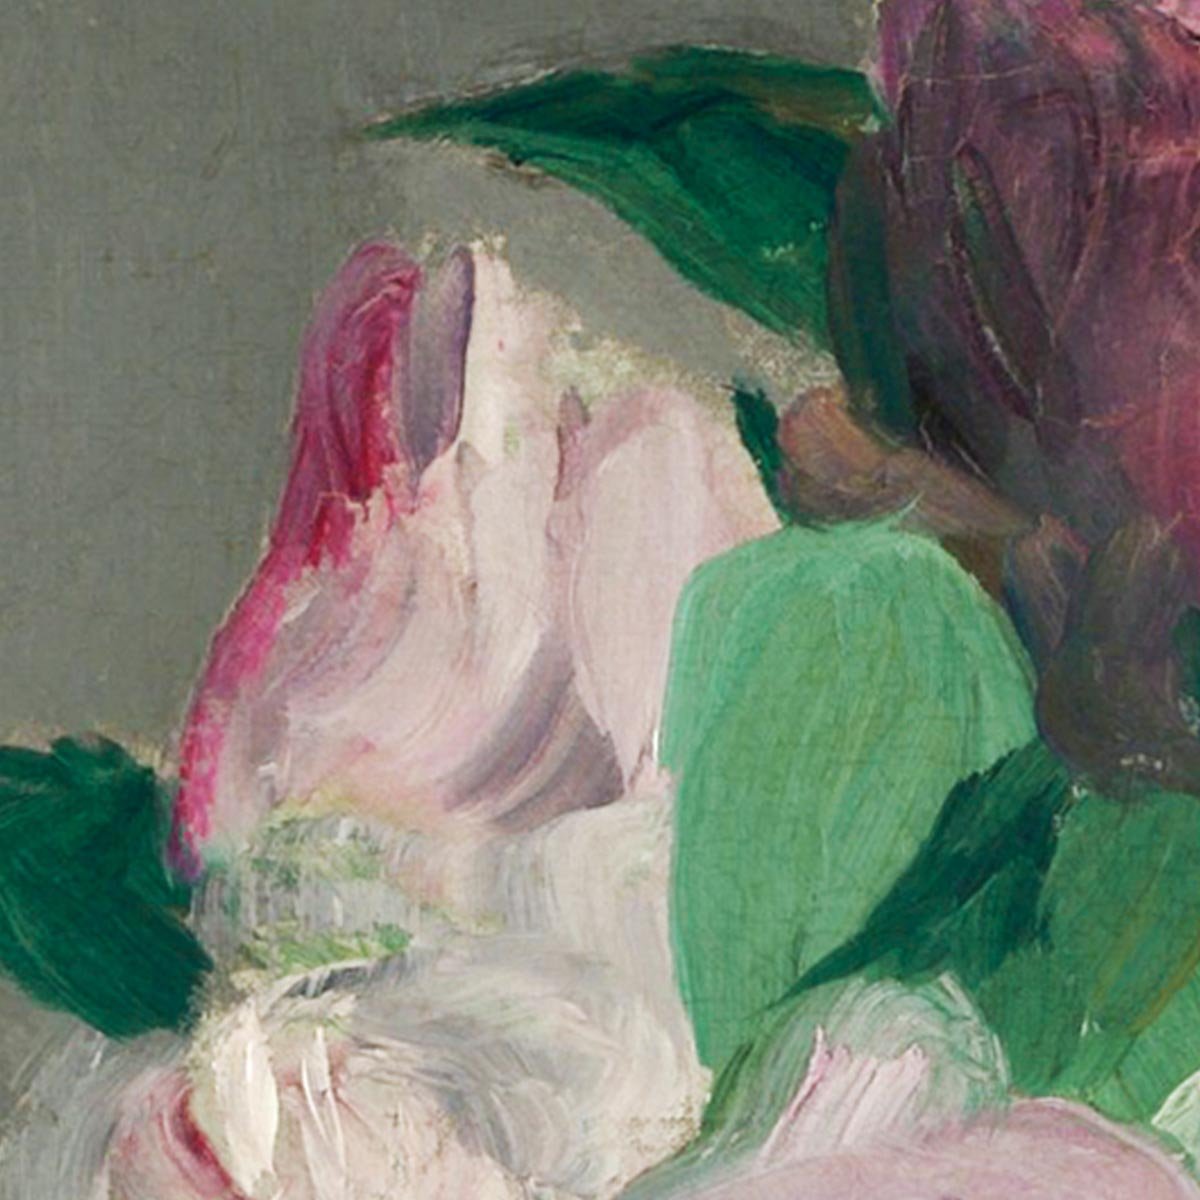 Peonies by Manet Exhibition Poster